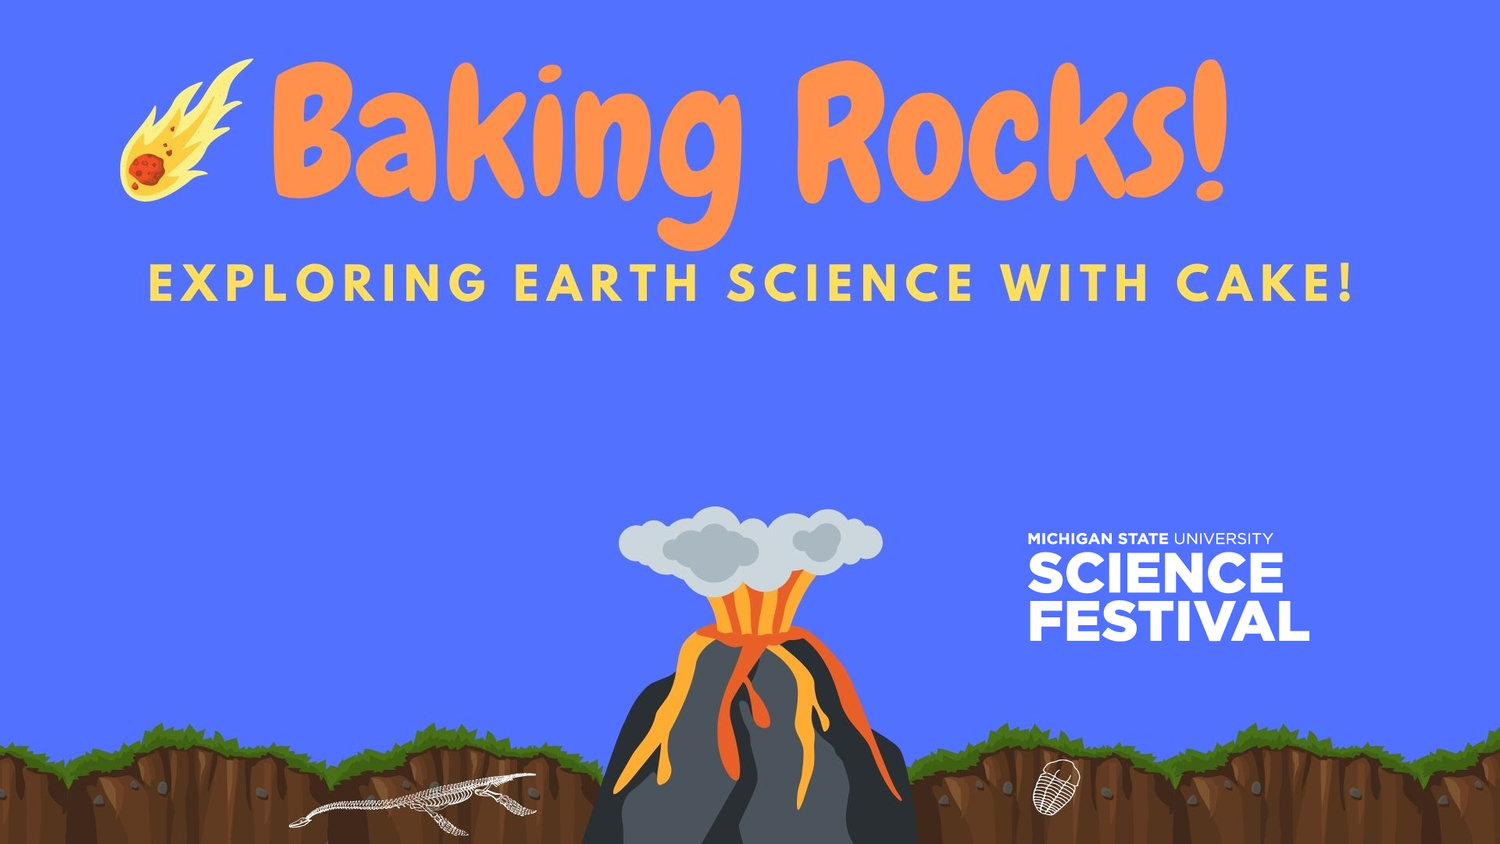 There is an online cooking class Saturday as part of MSU's Science Festival.